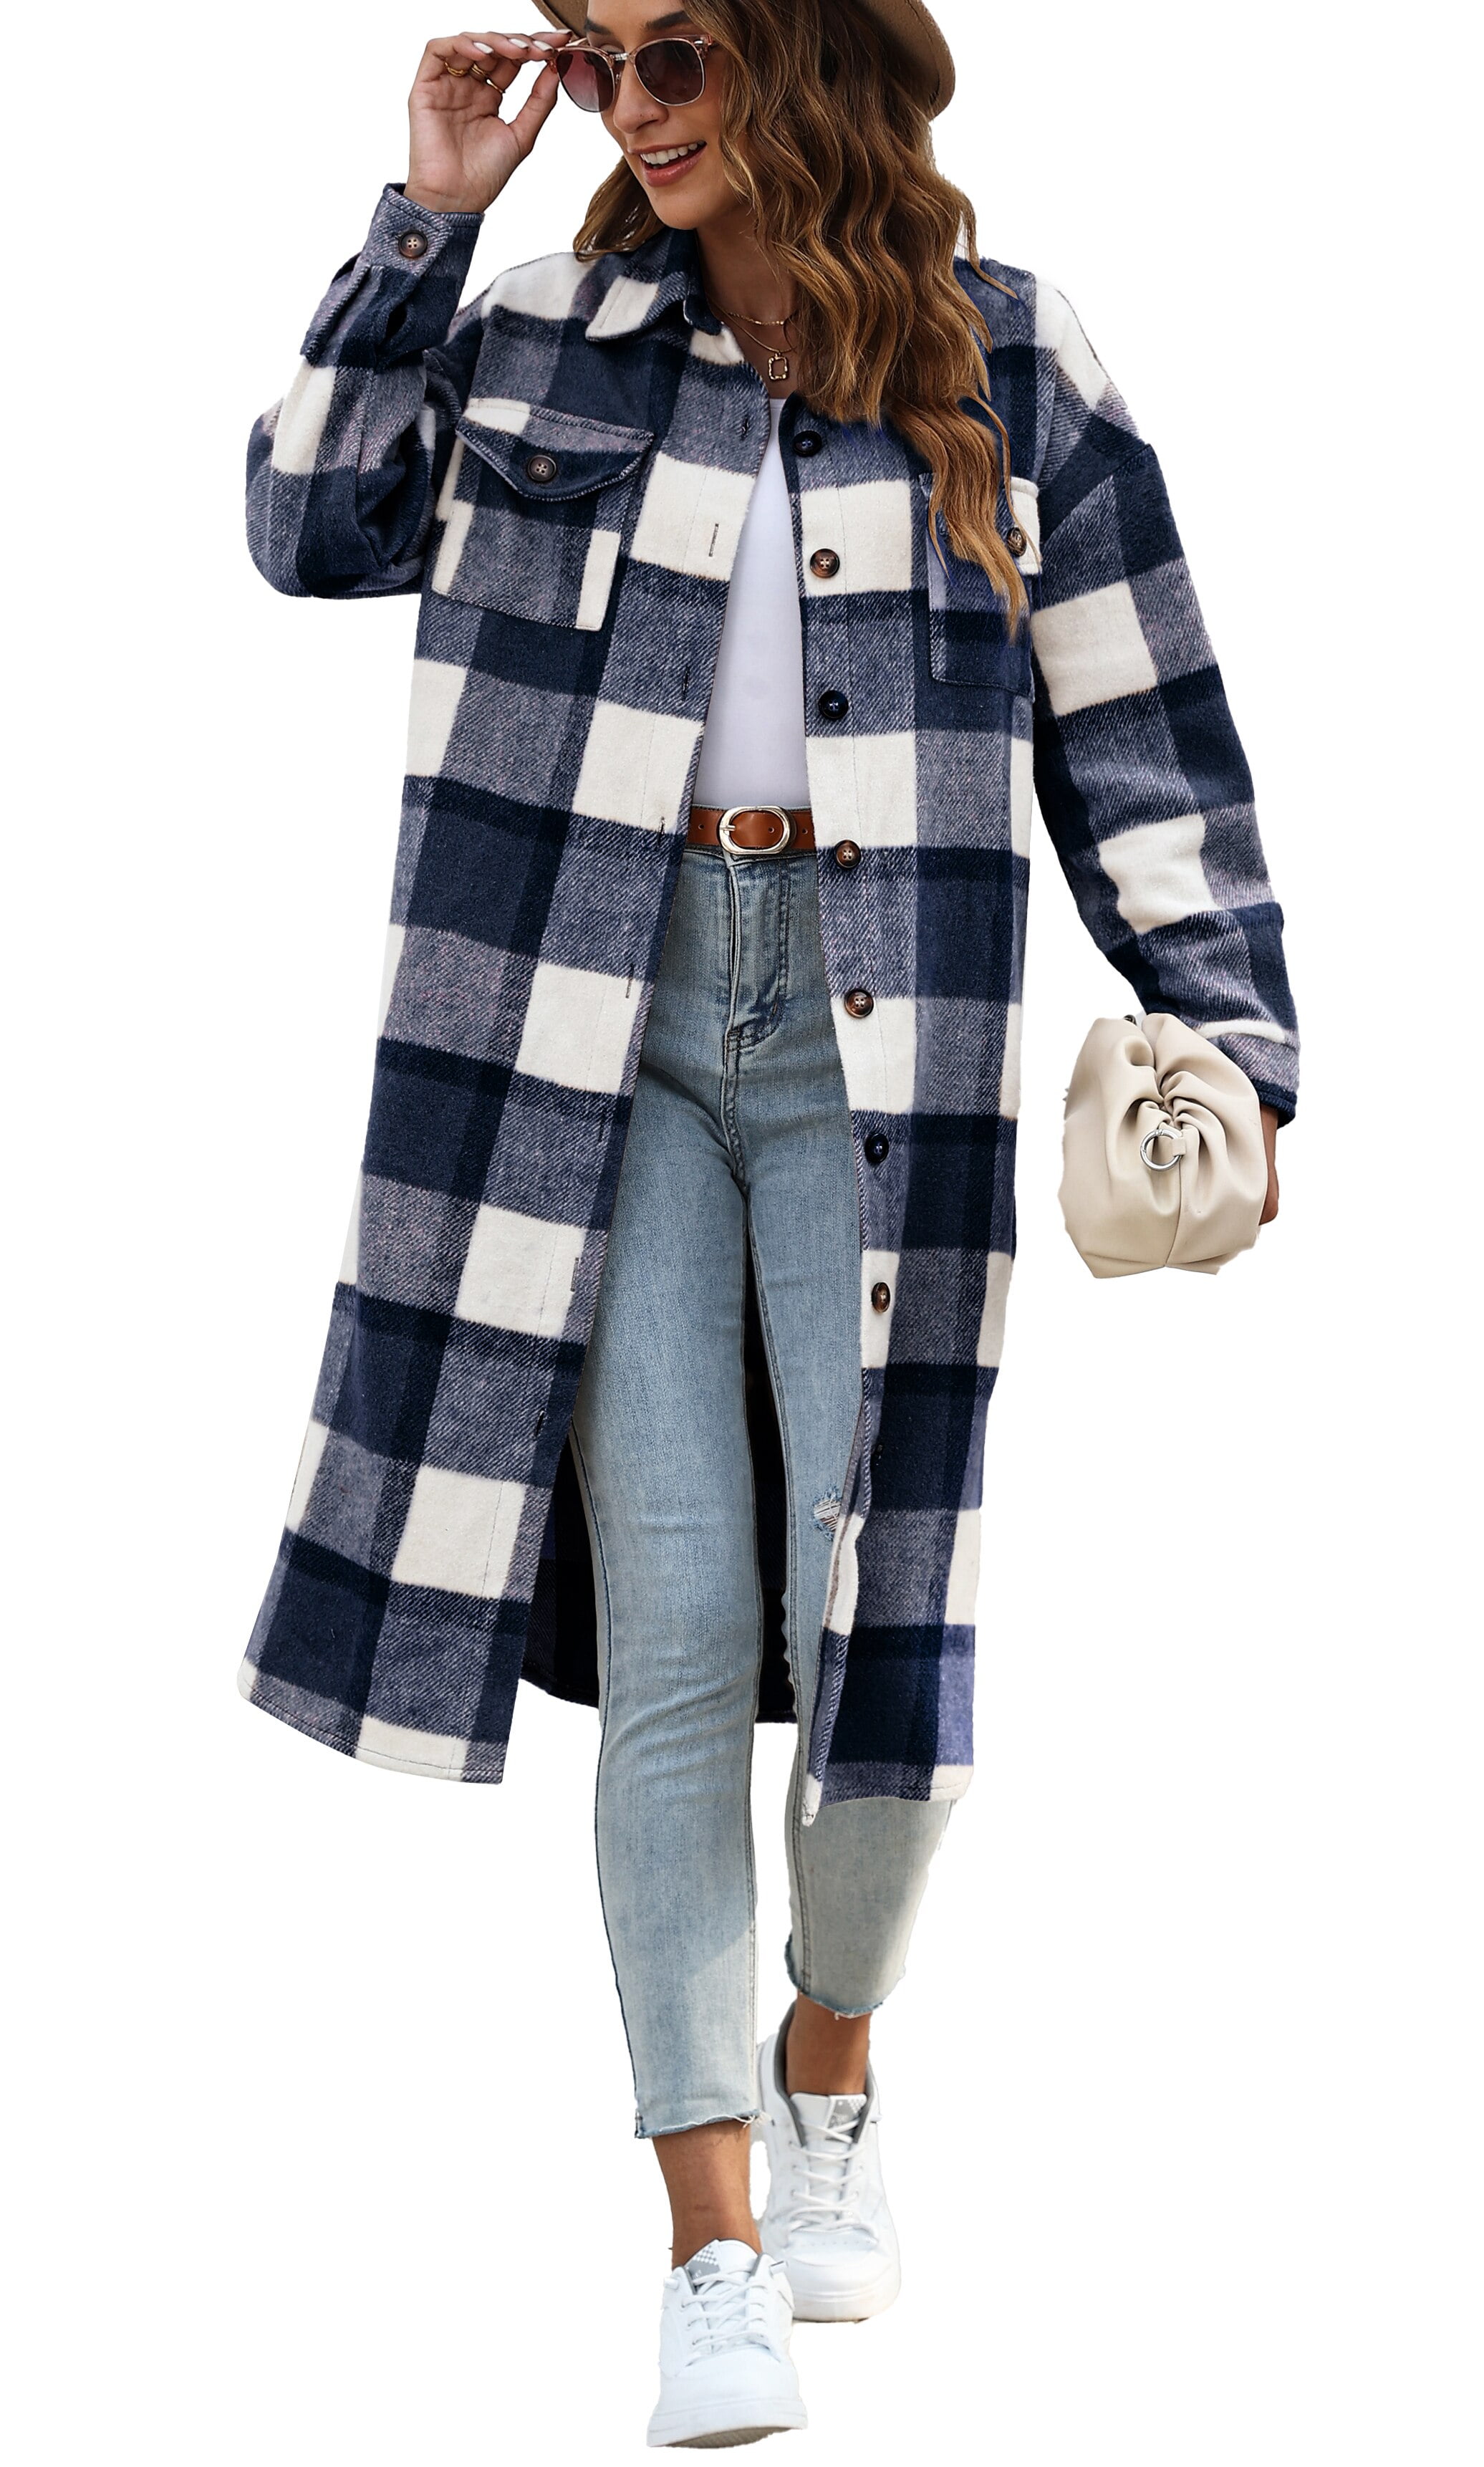 Fantaslook Flannel Shirts for Women Button Up Plaid Shirt Long Pocketed Shacket  Jacket Coat 